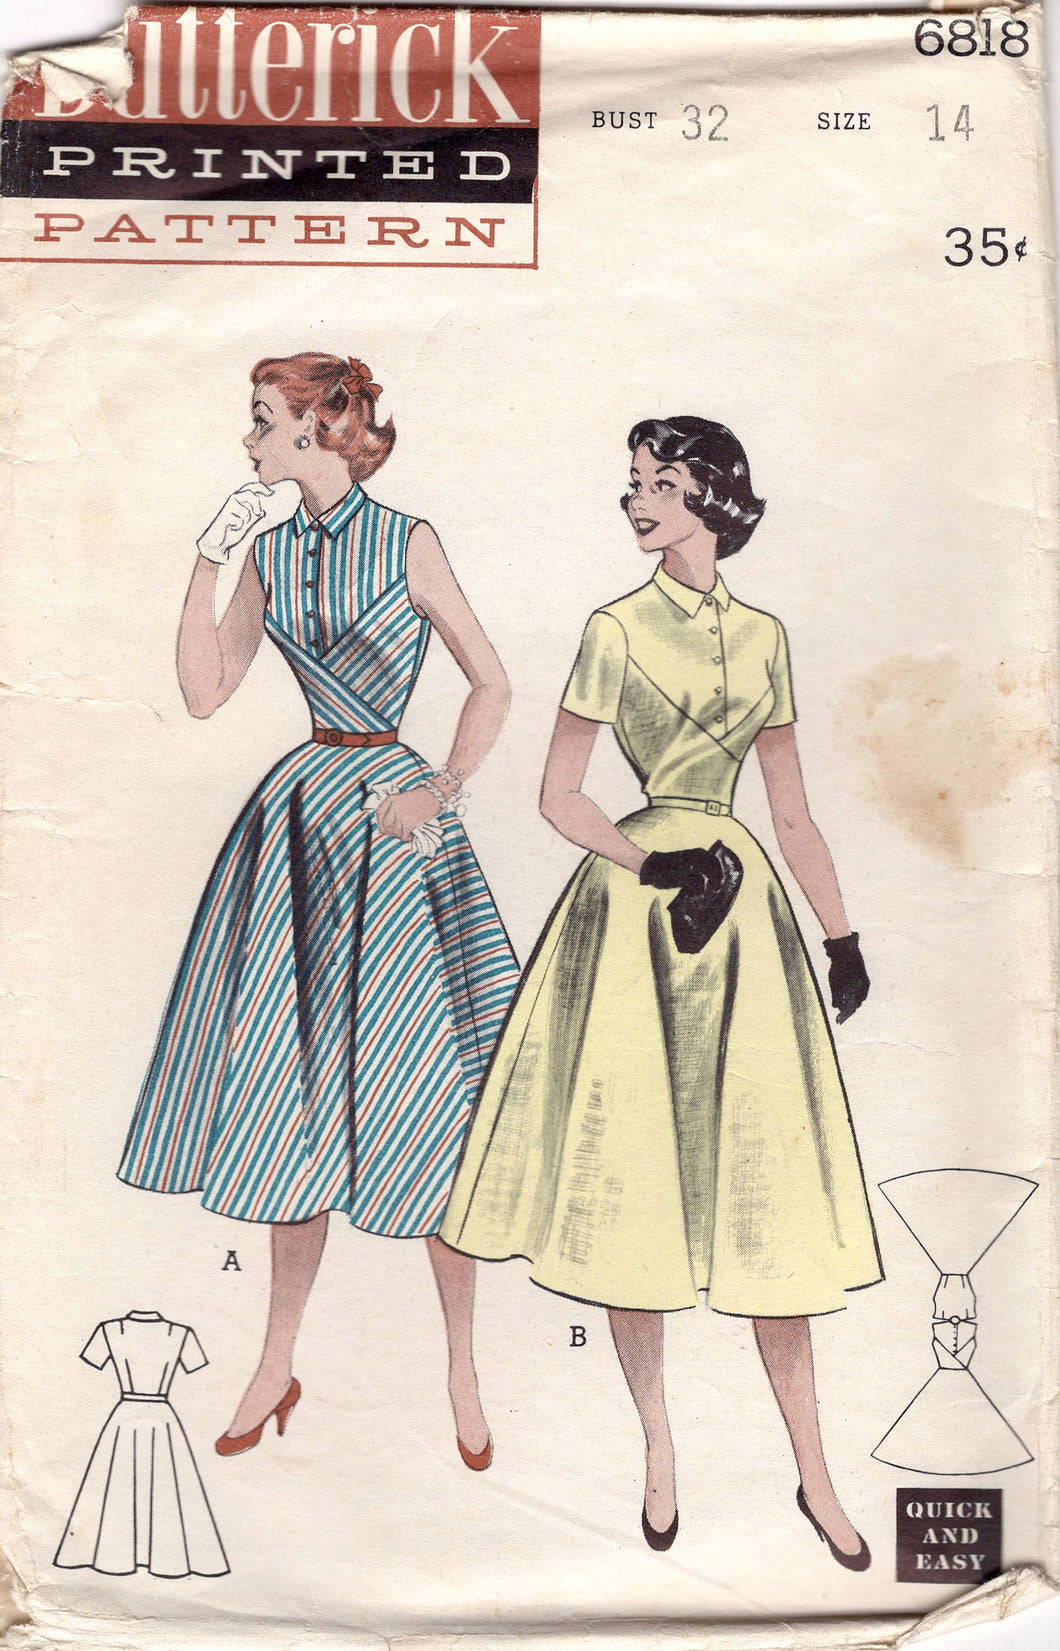 1950's Butterick One Piece Dress with Pieced Bodice and Semi-Circle Skirt - Bust 32